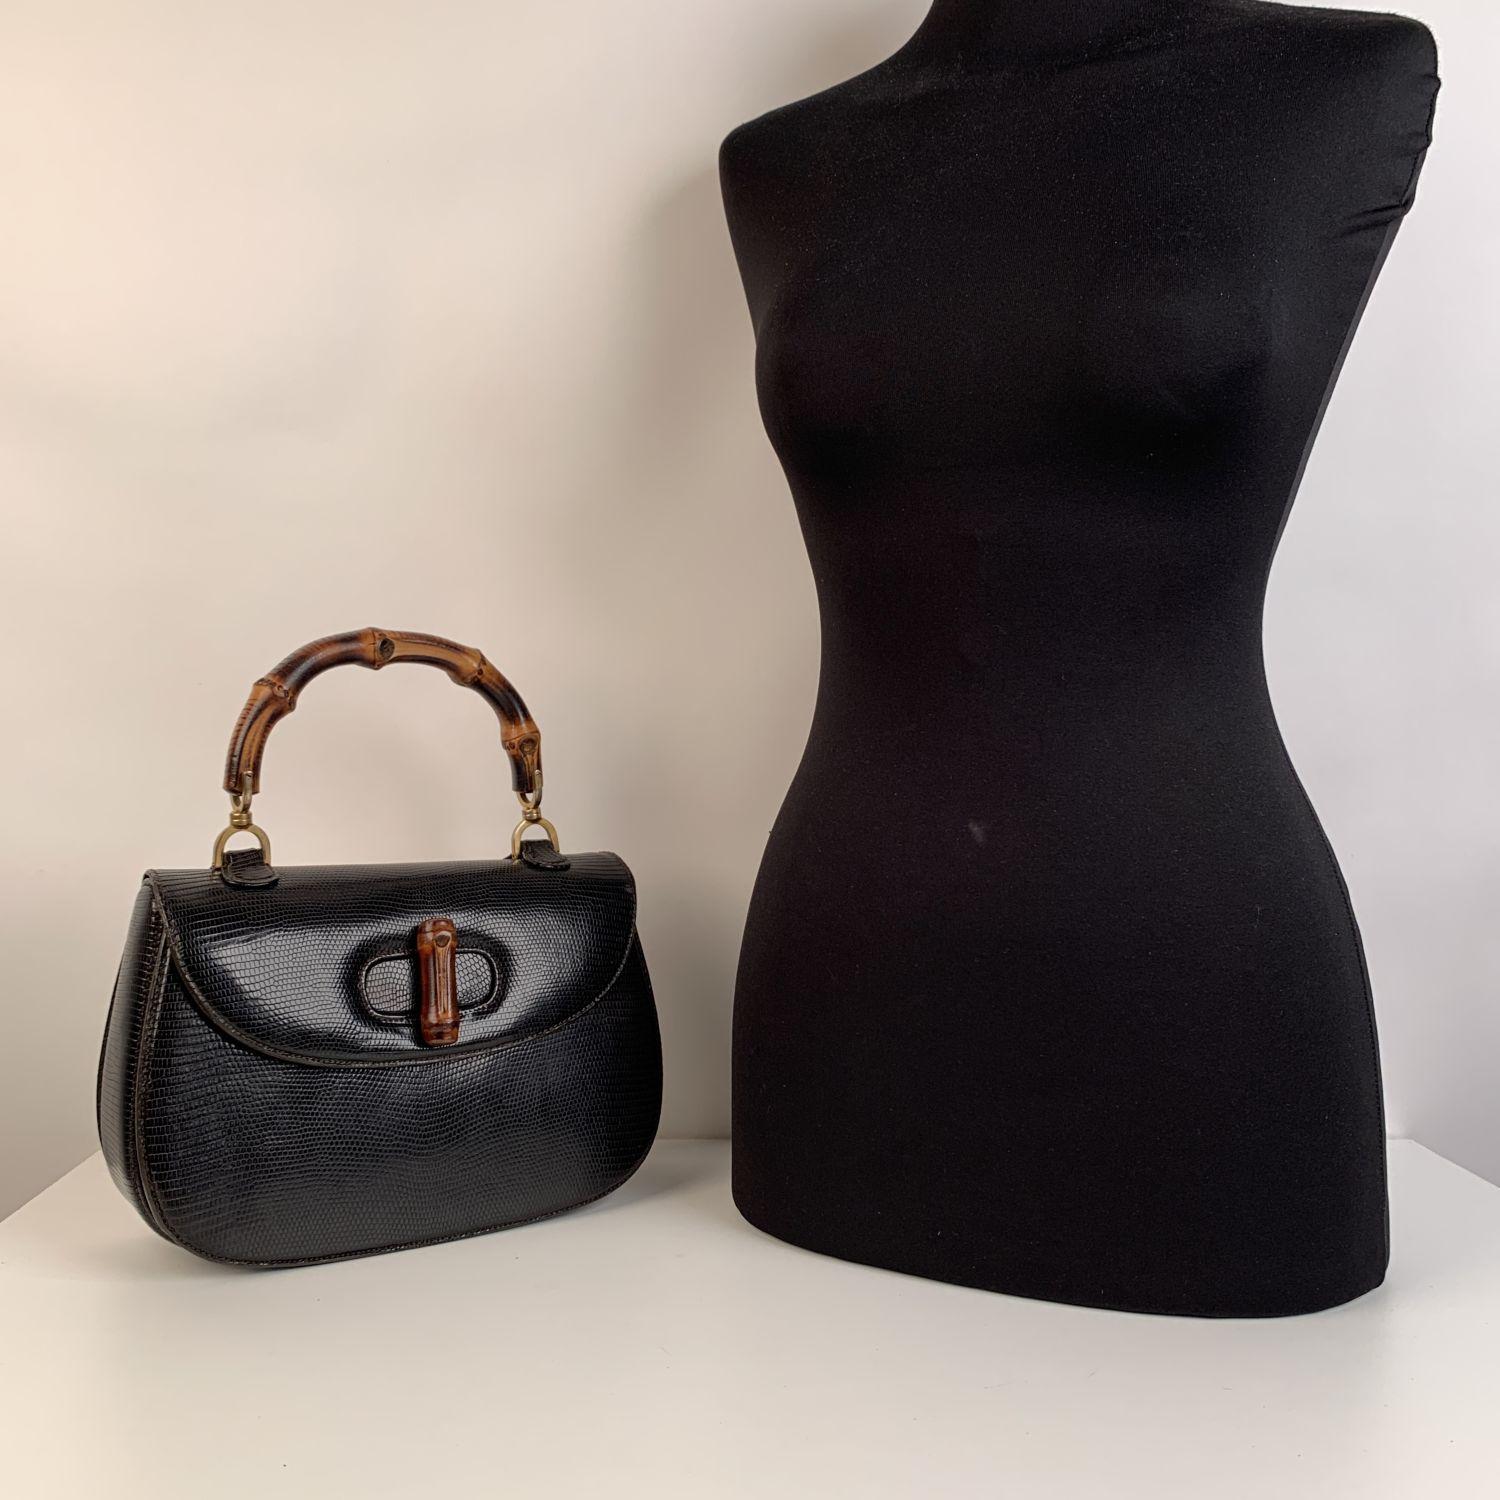 Rare GUCCI vintage Leather bamboo bag in dark brown (very dark, it look like black) lizard leather. The bag features a looping bamboo top handle, a frontal flap, brass hardware and a bamboo turn lock. This is an iconic model created by GUCCI